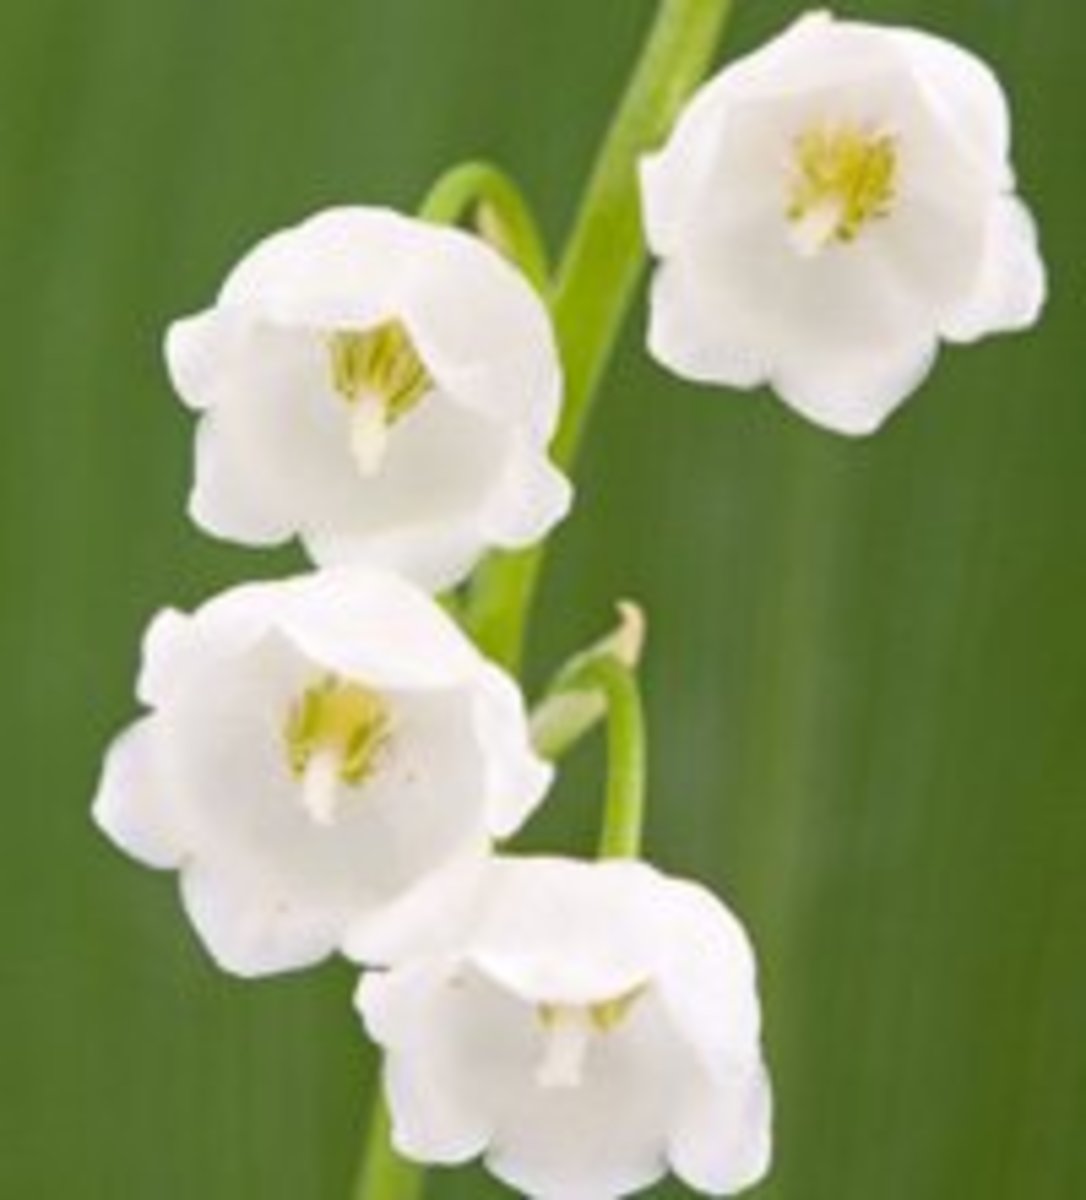 Lily-of-the-valley is a popular wedding flower.